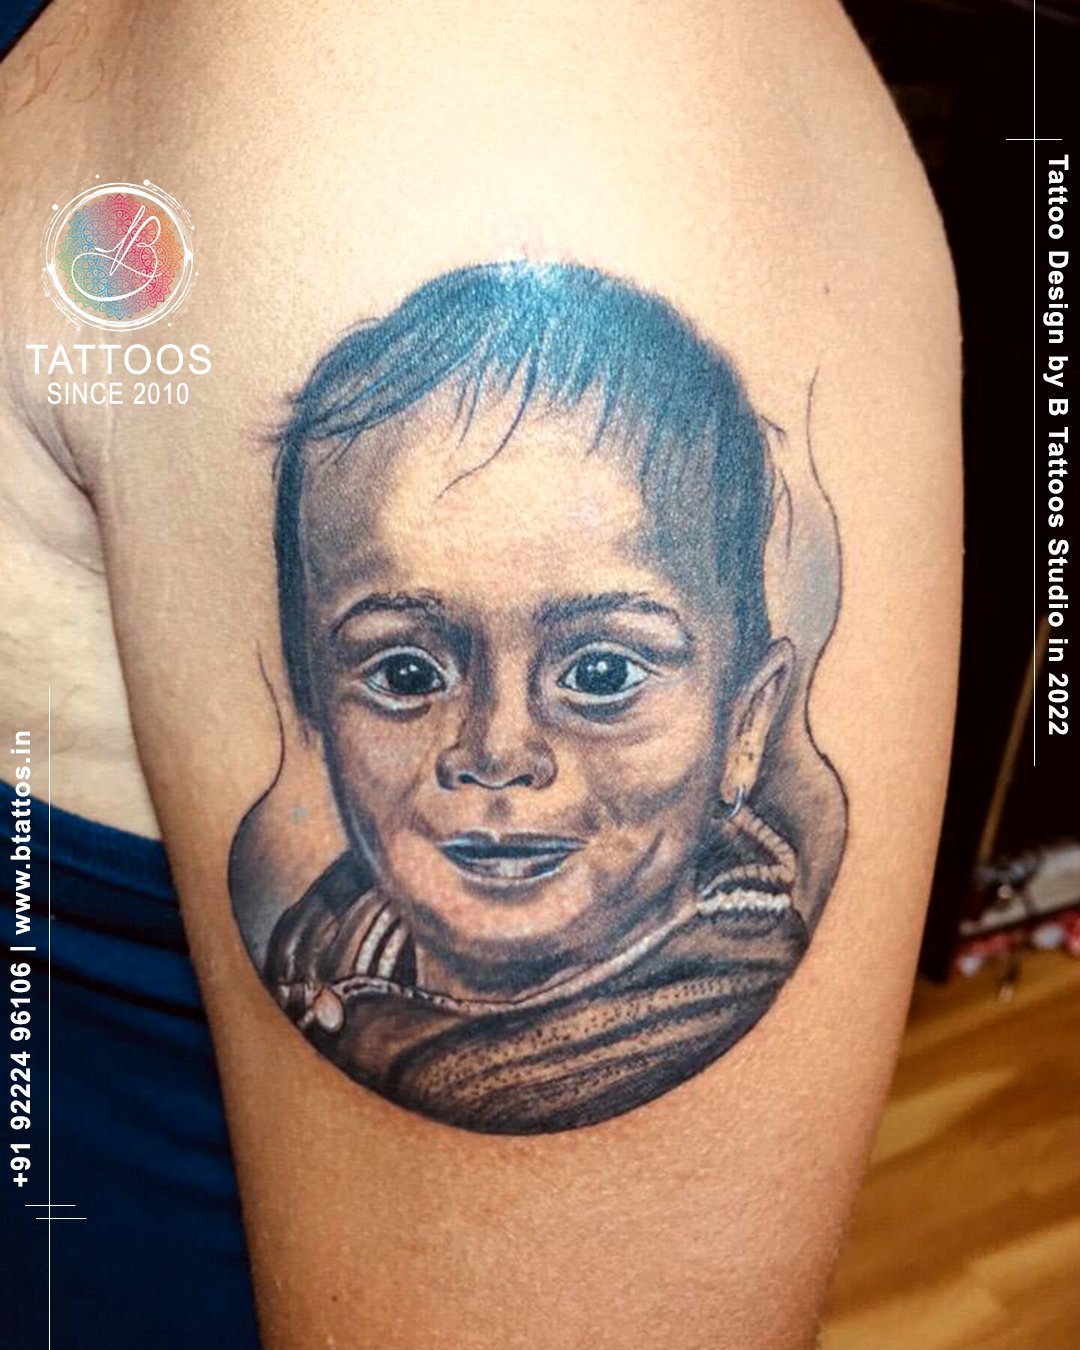 Details 90+ about baby girl tattoo latest - in.daotaonec